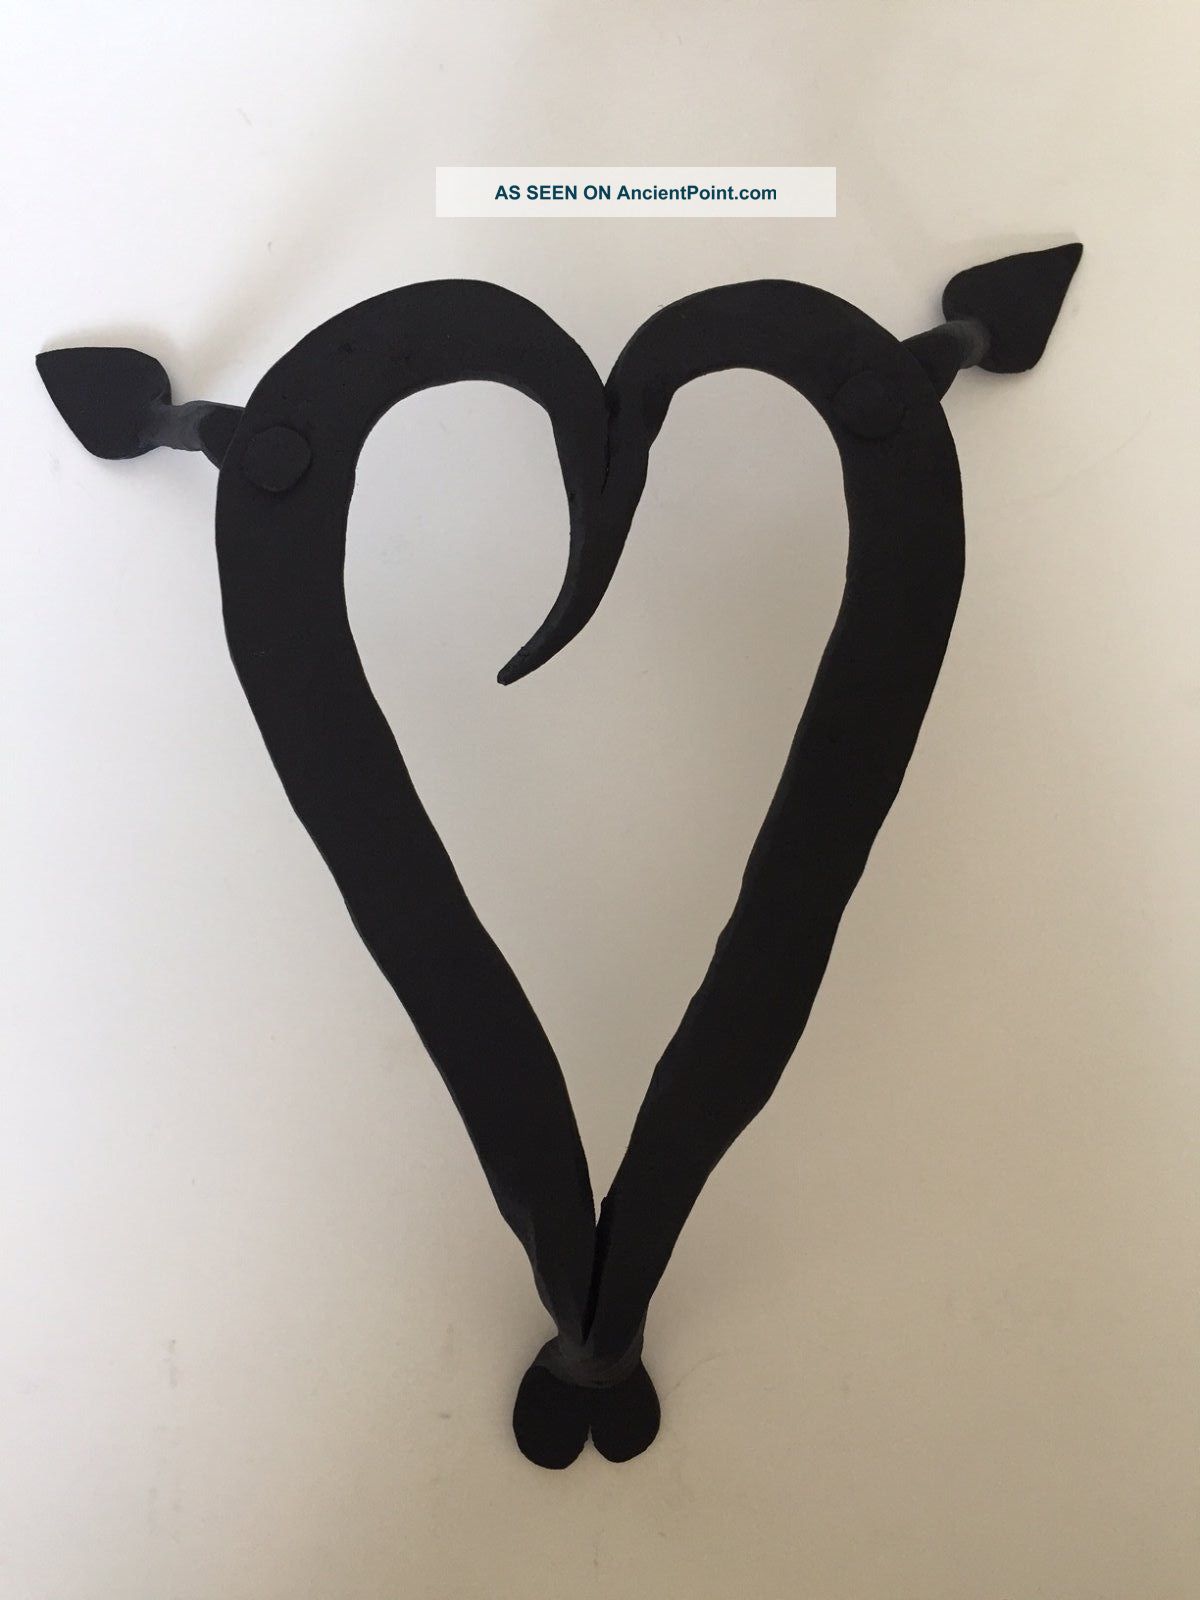 Antique Vintage Hand Forged Iron Heart Trivet Plant Stand Display Trivets photo